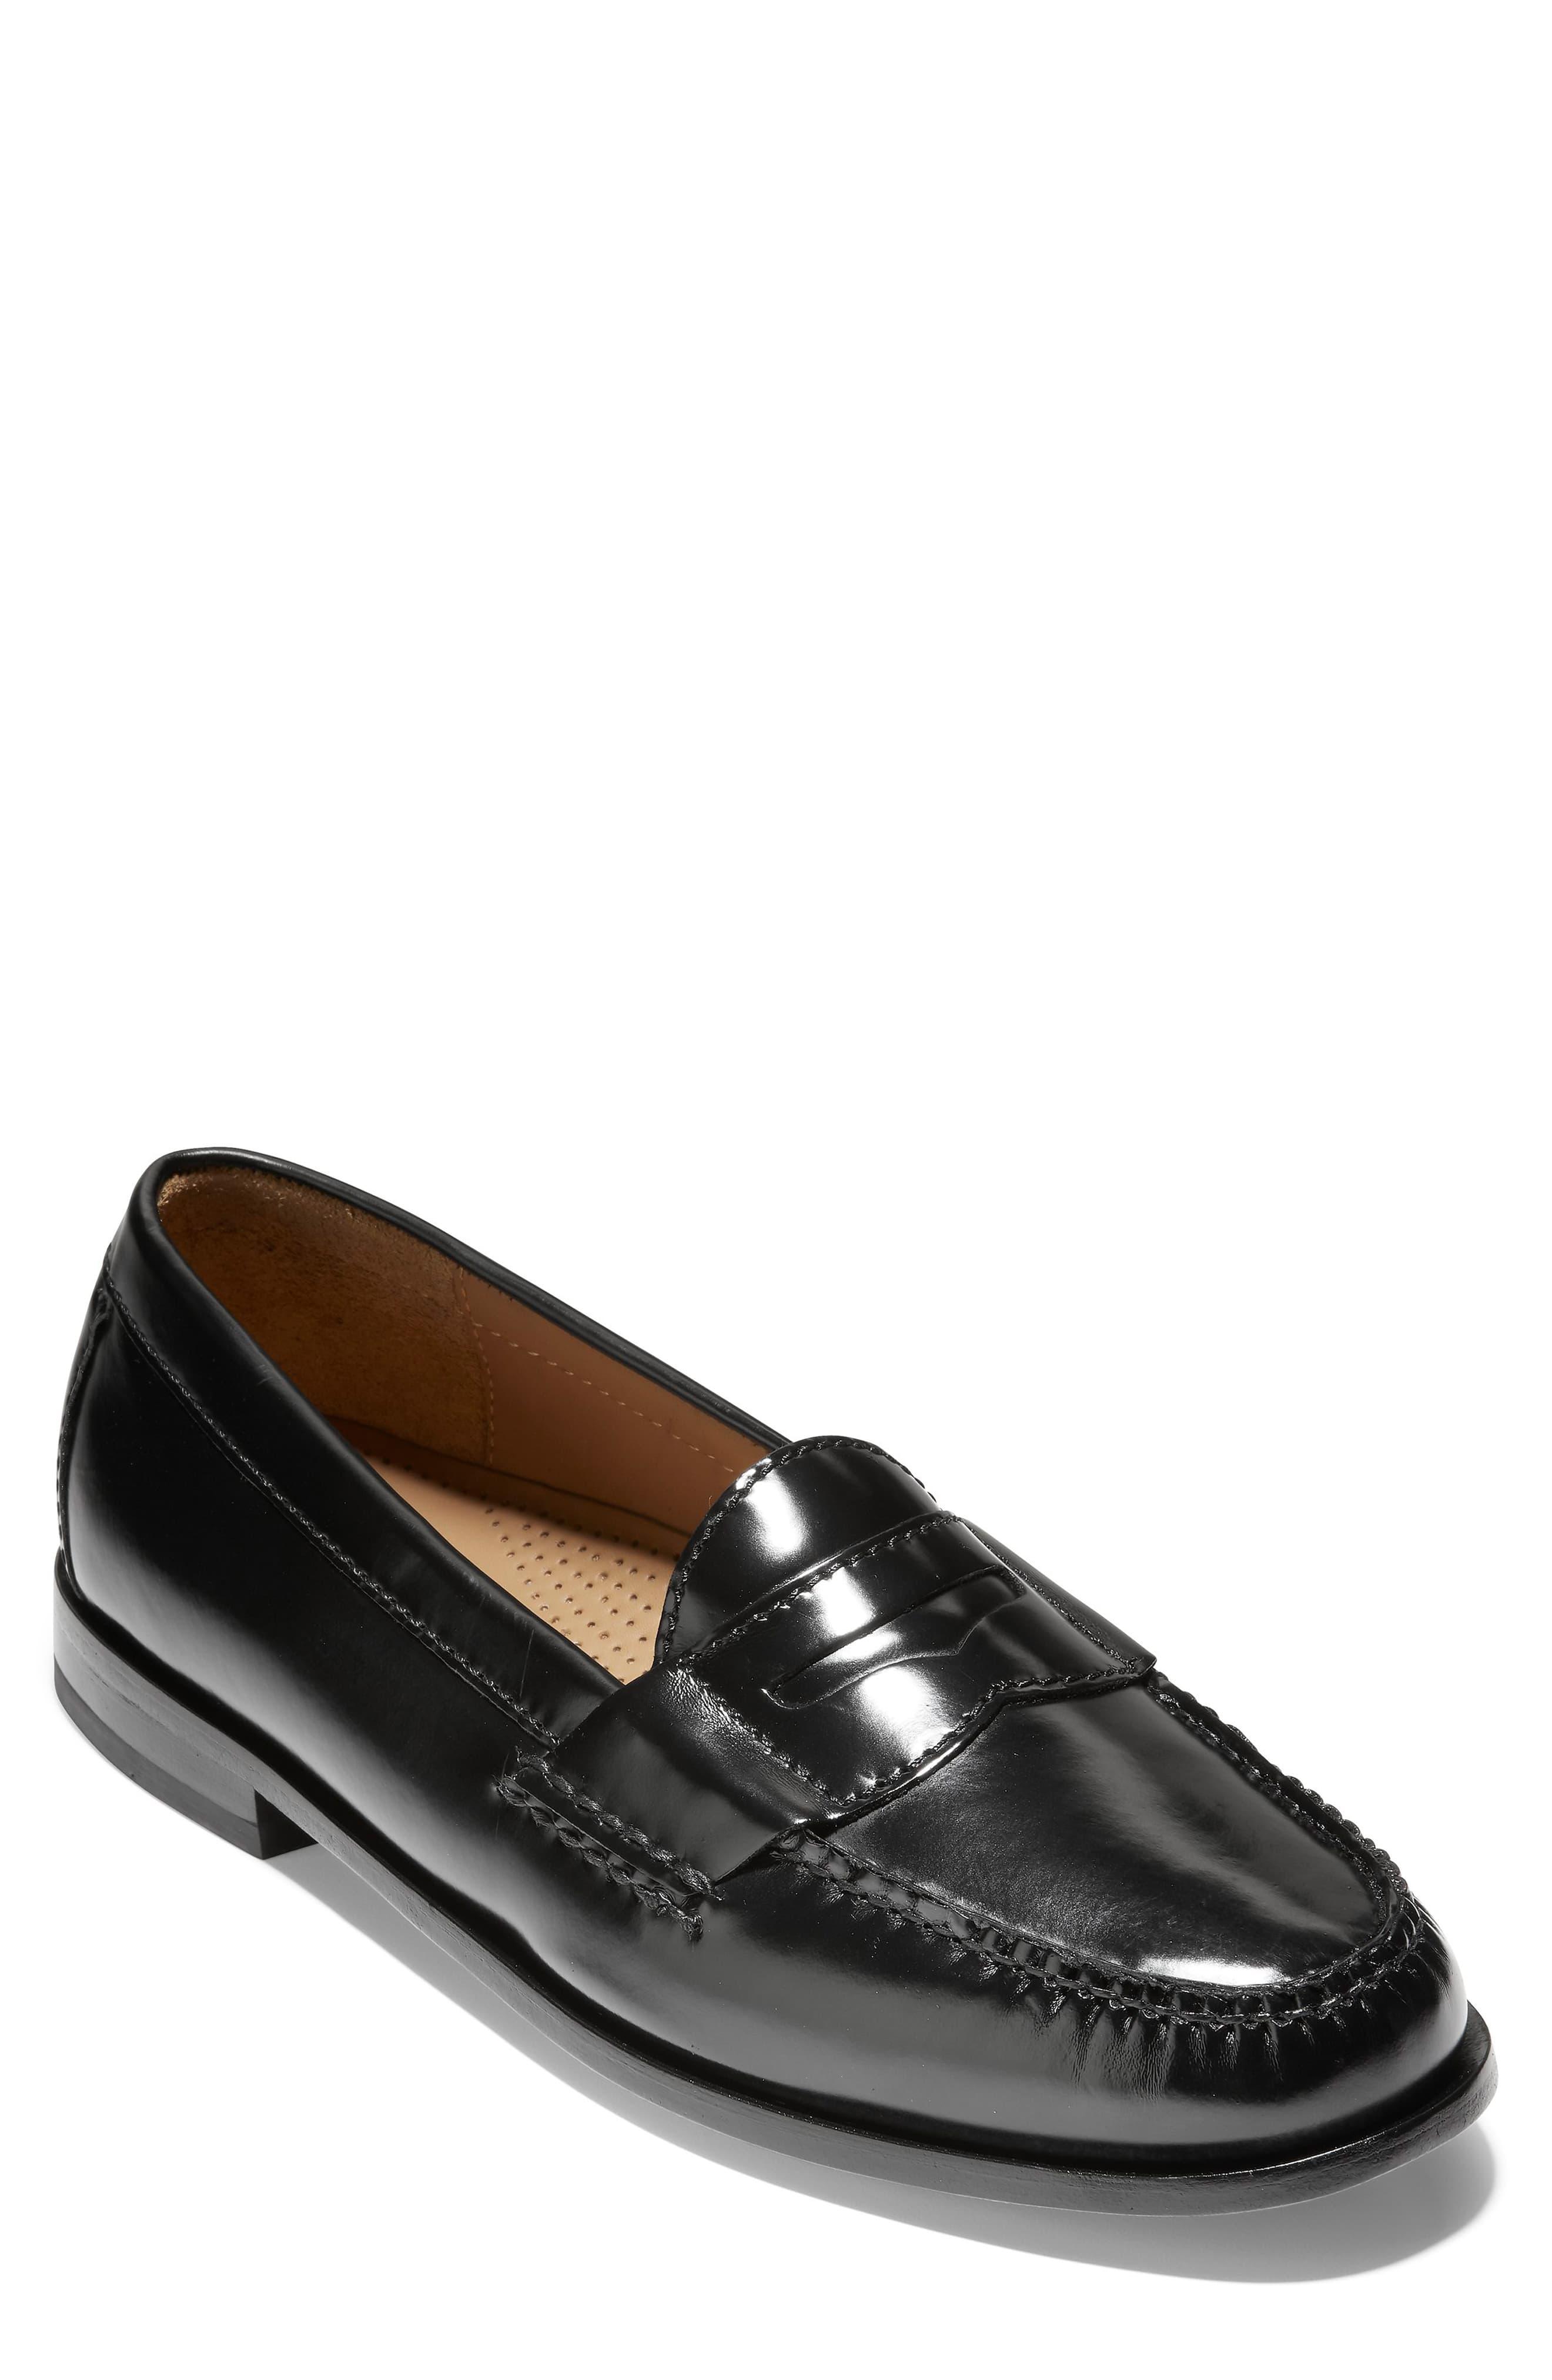 Cole Haan Pinch Penny Loafer in Black for Men - Lyst